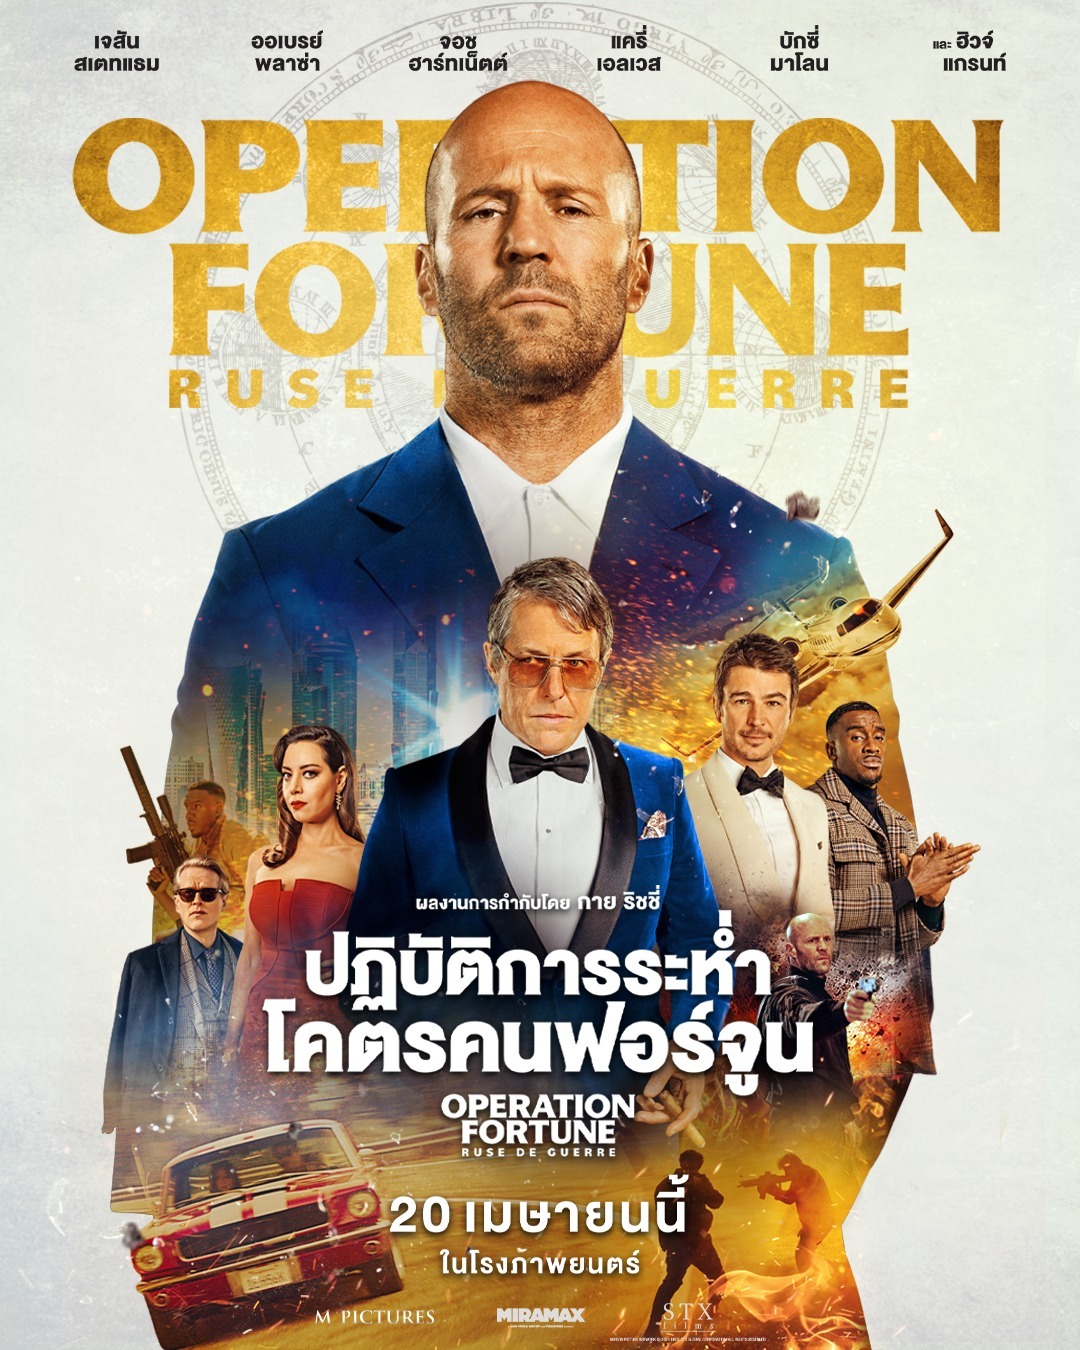 Extra Large Movie Poster Image for Operation Fortune: Ruse de guerre (#9 of 9)